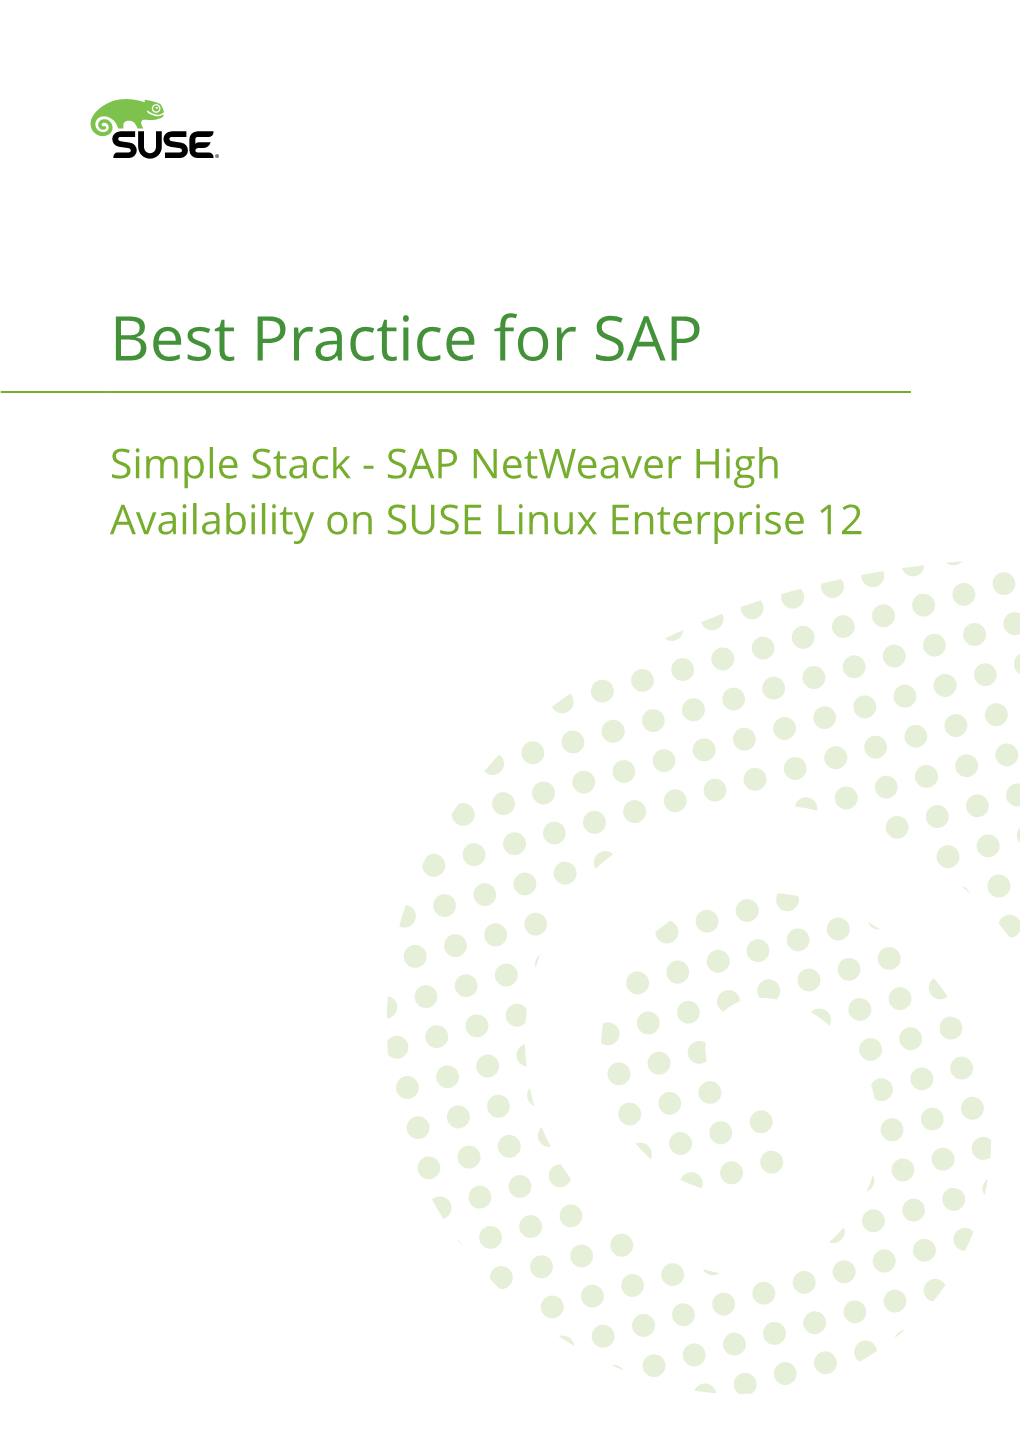 SAP Netweaver High Availability on SUSE Linux